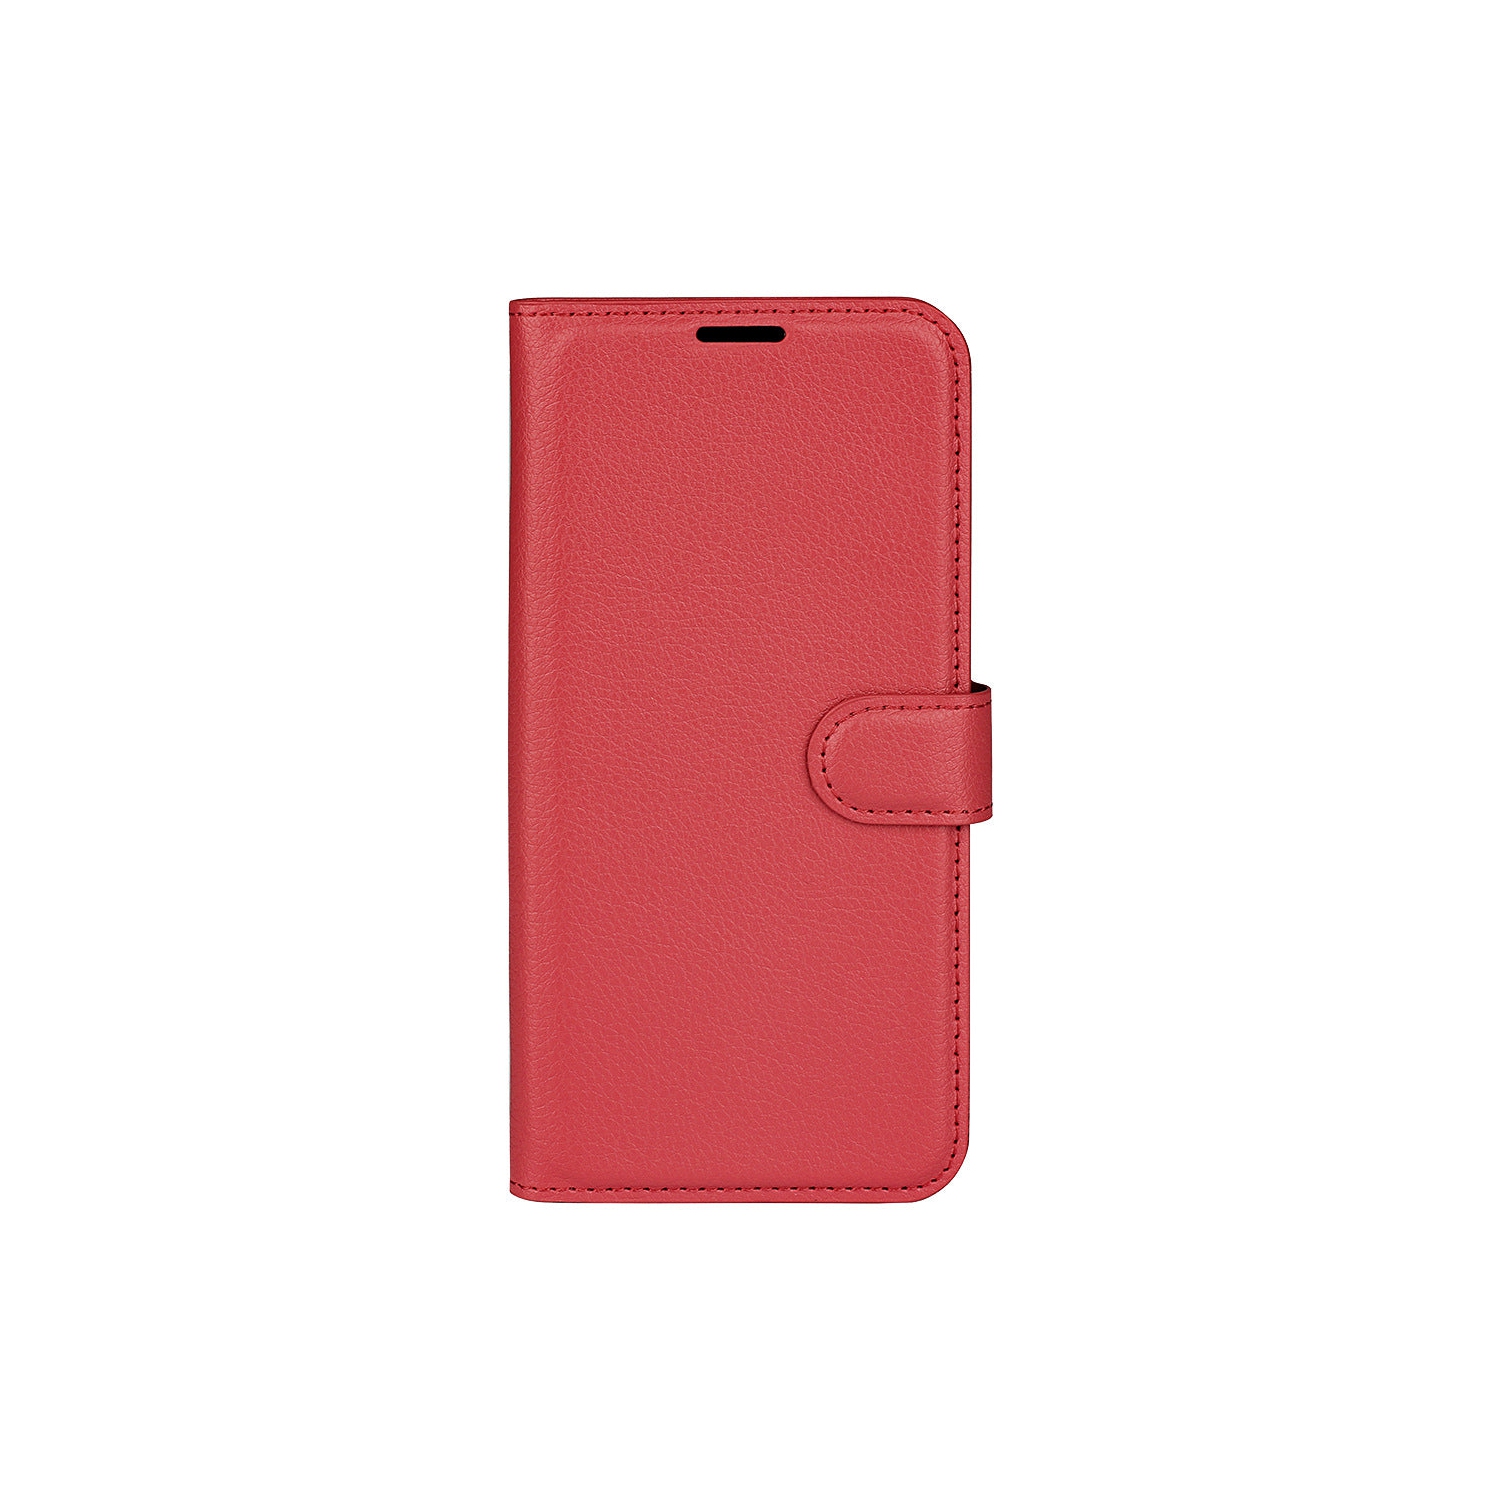 PANDACO Red Leather Wallet Case for Google Pixel 6 Pro